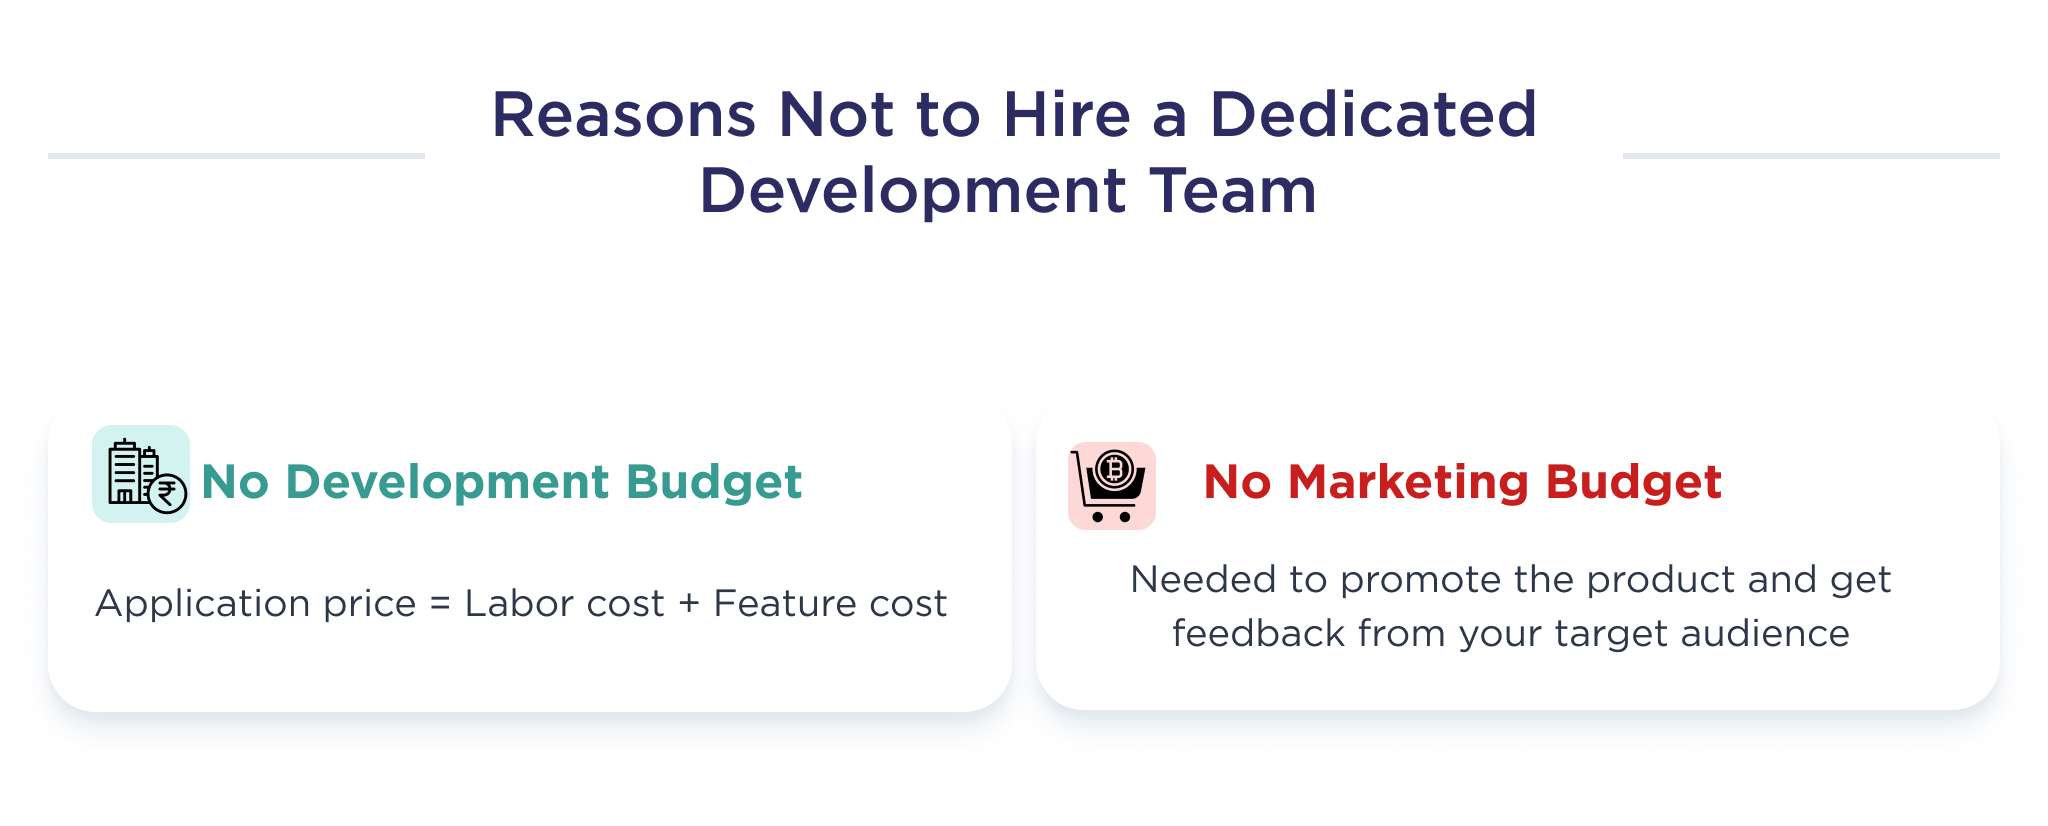 The main reasons not to hire a dedicated development team